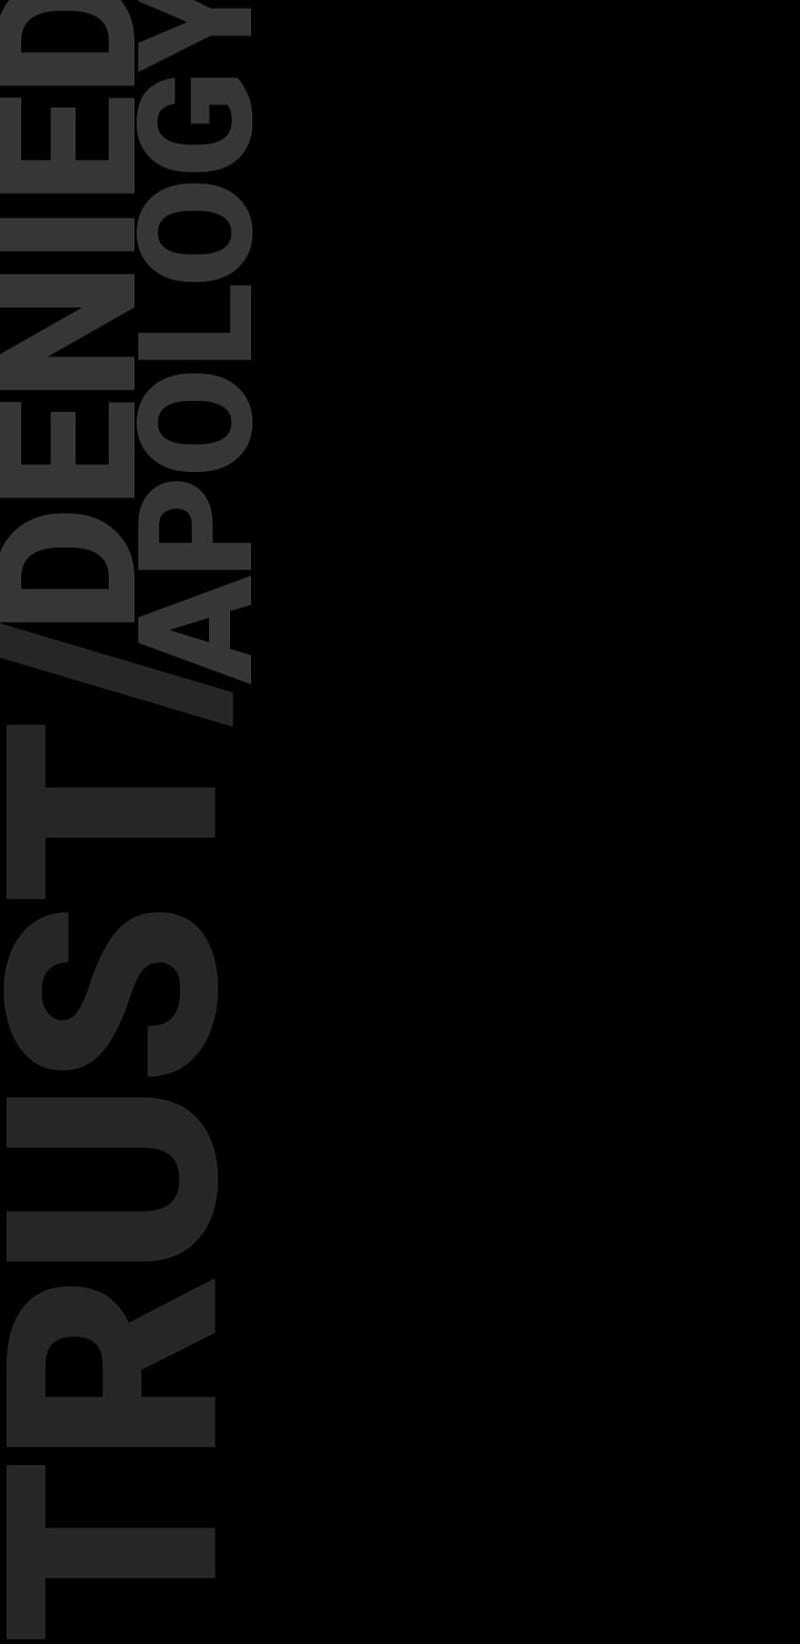 TRUST denied , black, global, new, quote, saying, smartphones, white, HD phone wallpaper